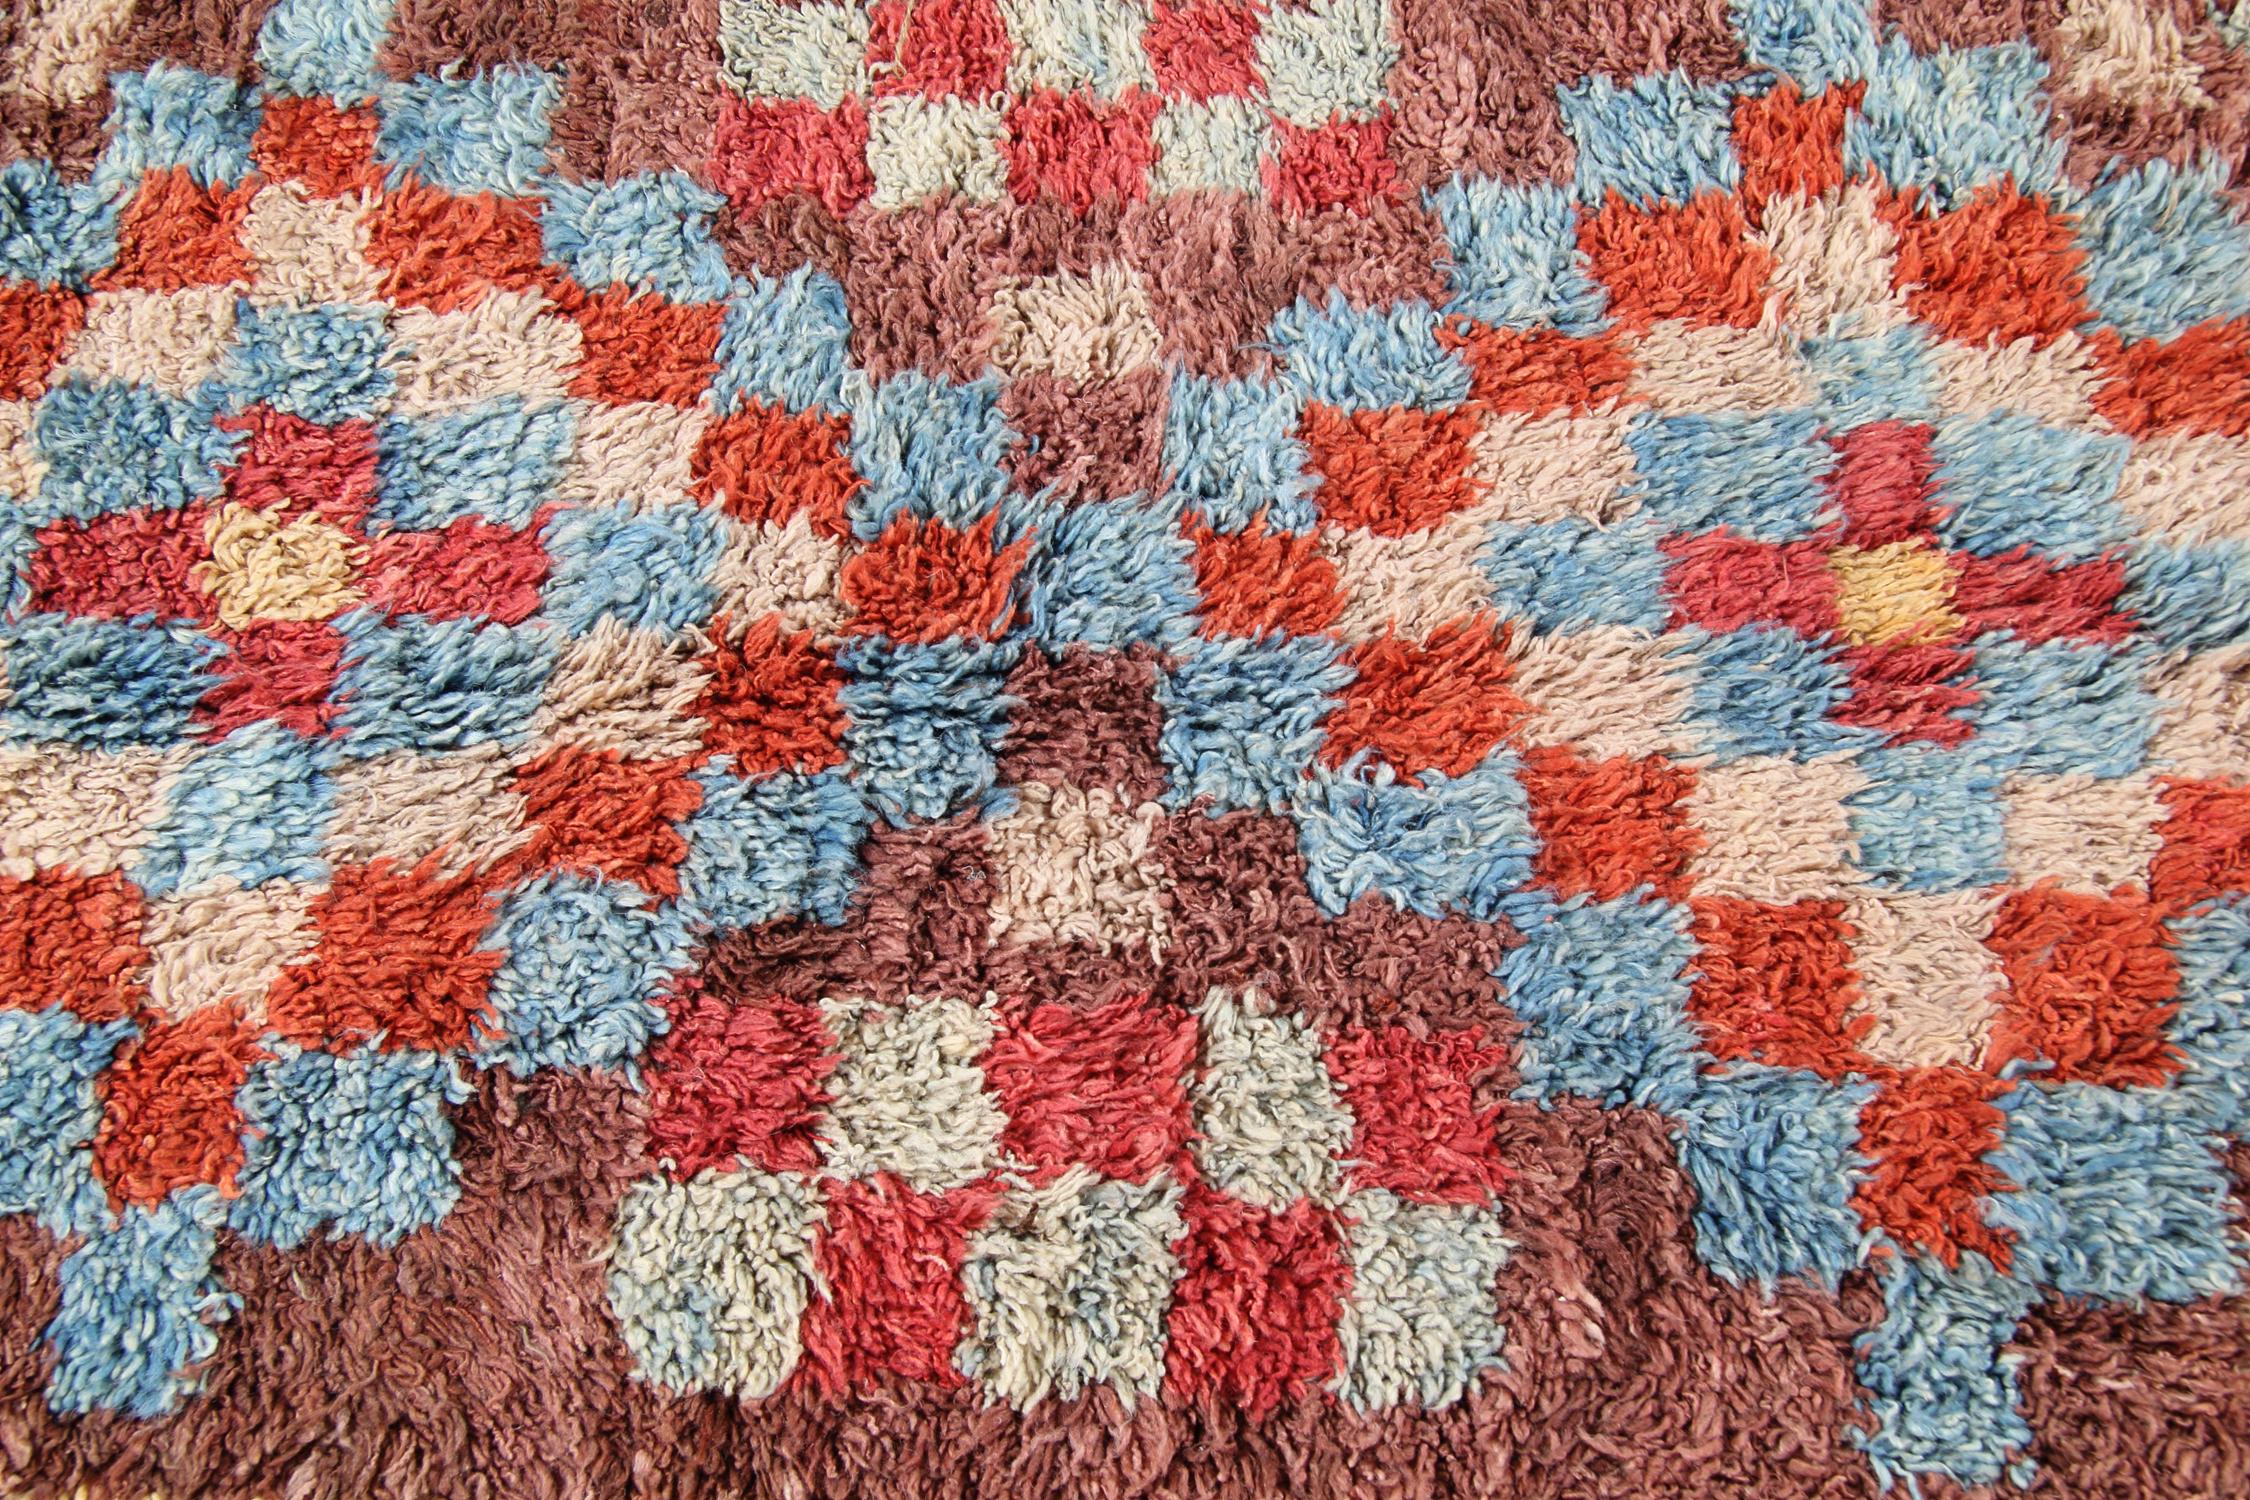 Handmade Carpet Moroccan Rugs, Shag Rugs, Pink and Red Primitive Carpet for Sale In Excellent Condition For Sale In Hampshire, GB